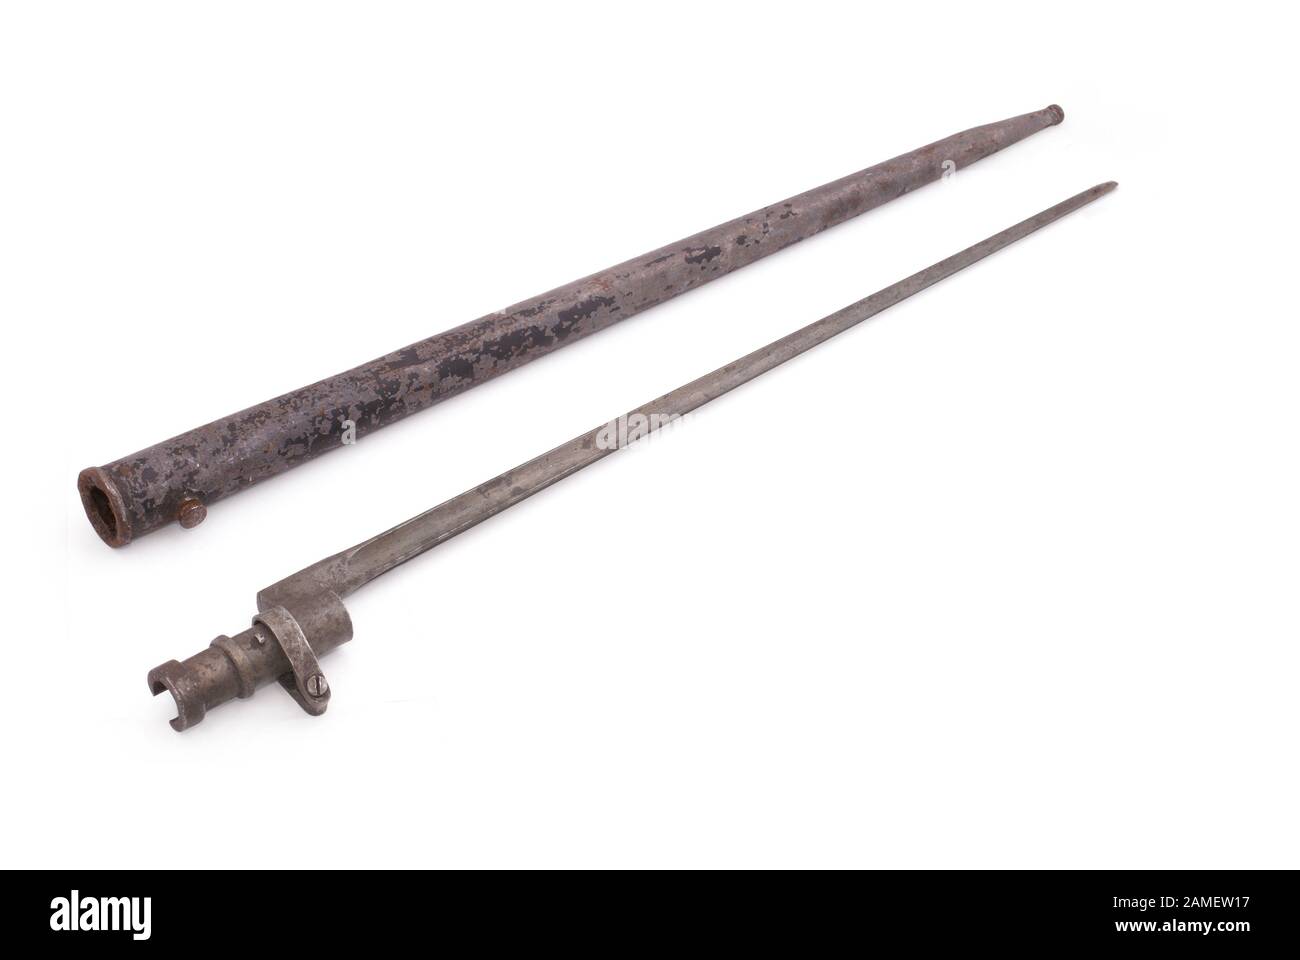 Austria-Hungarian infantry bayonet remade from Russian bayonet of Mosin system. From the time of WWI. Stock Photo